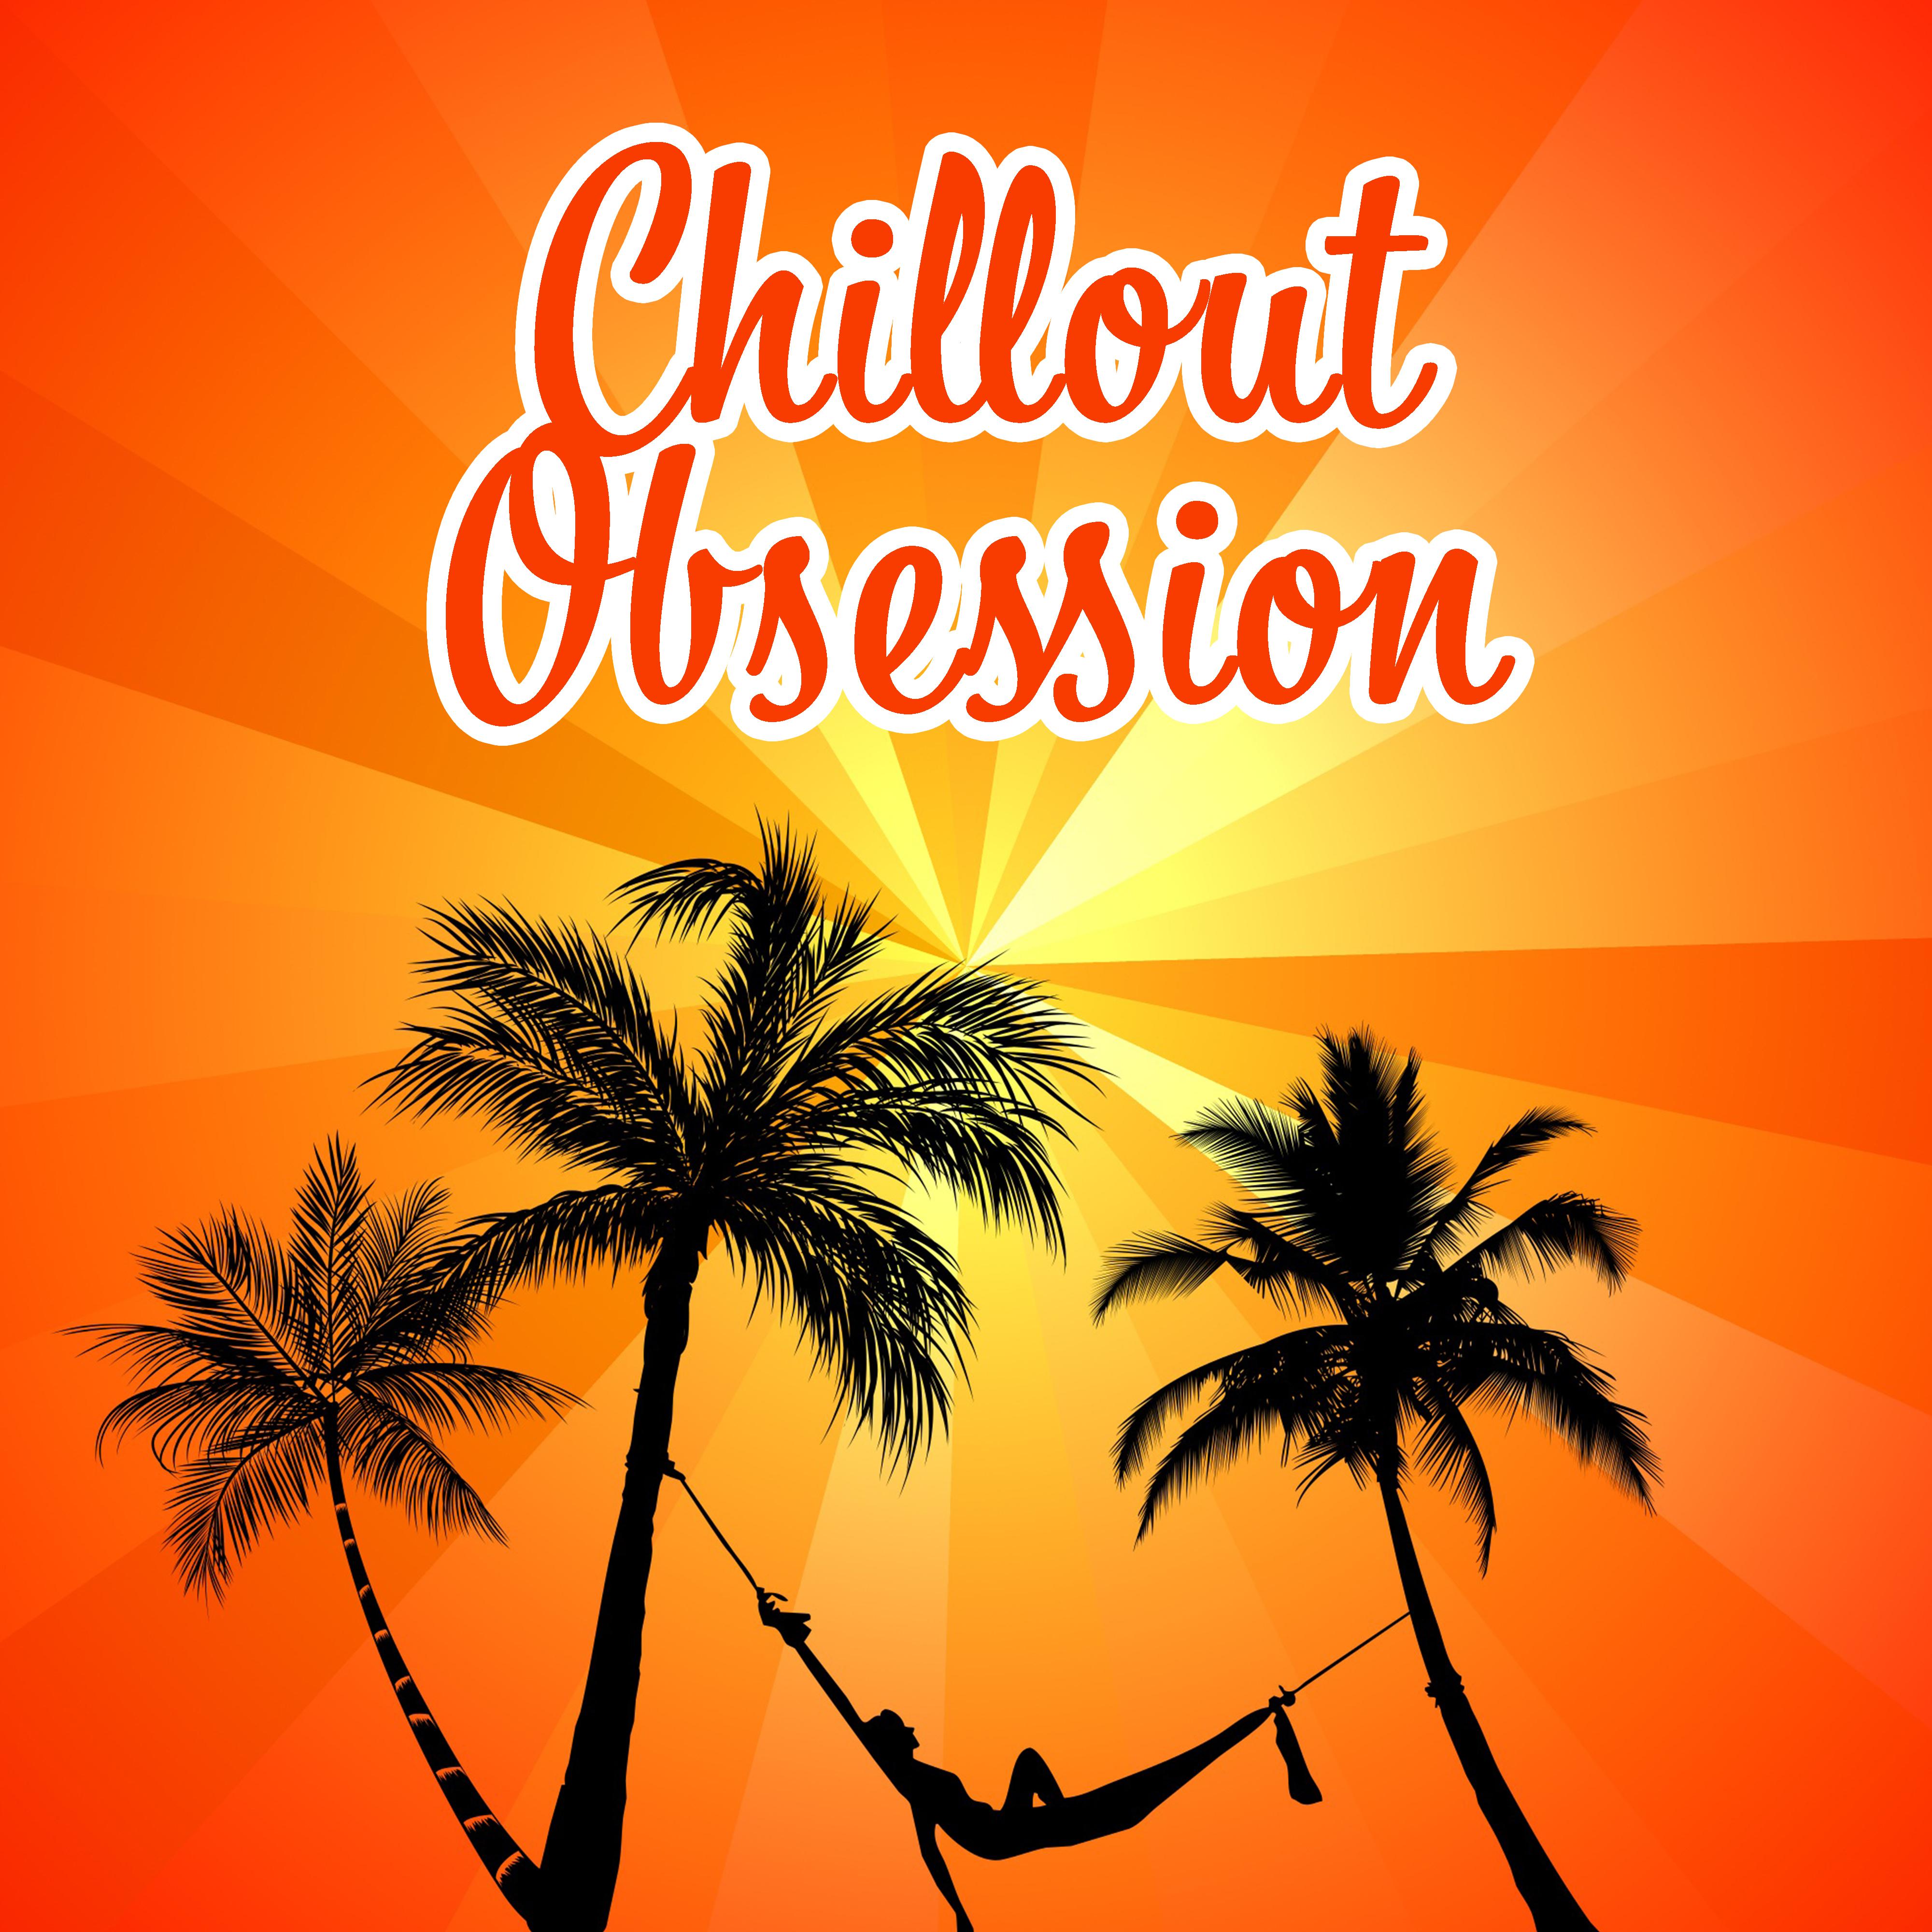 Chillout Obsession  Summer Vibes, Chill Out Music, Vacation Time, Downbeat Chillout, Lounge